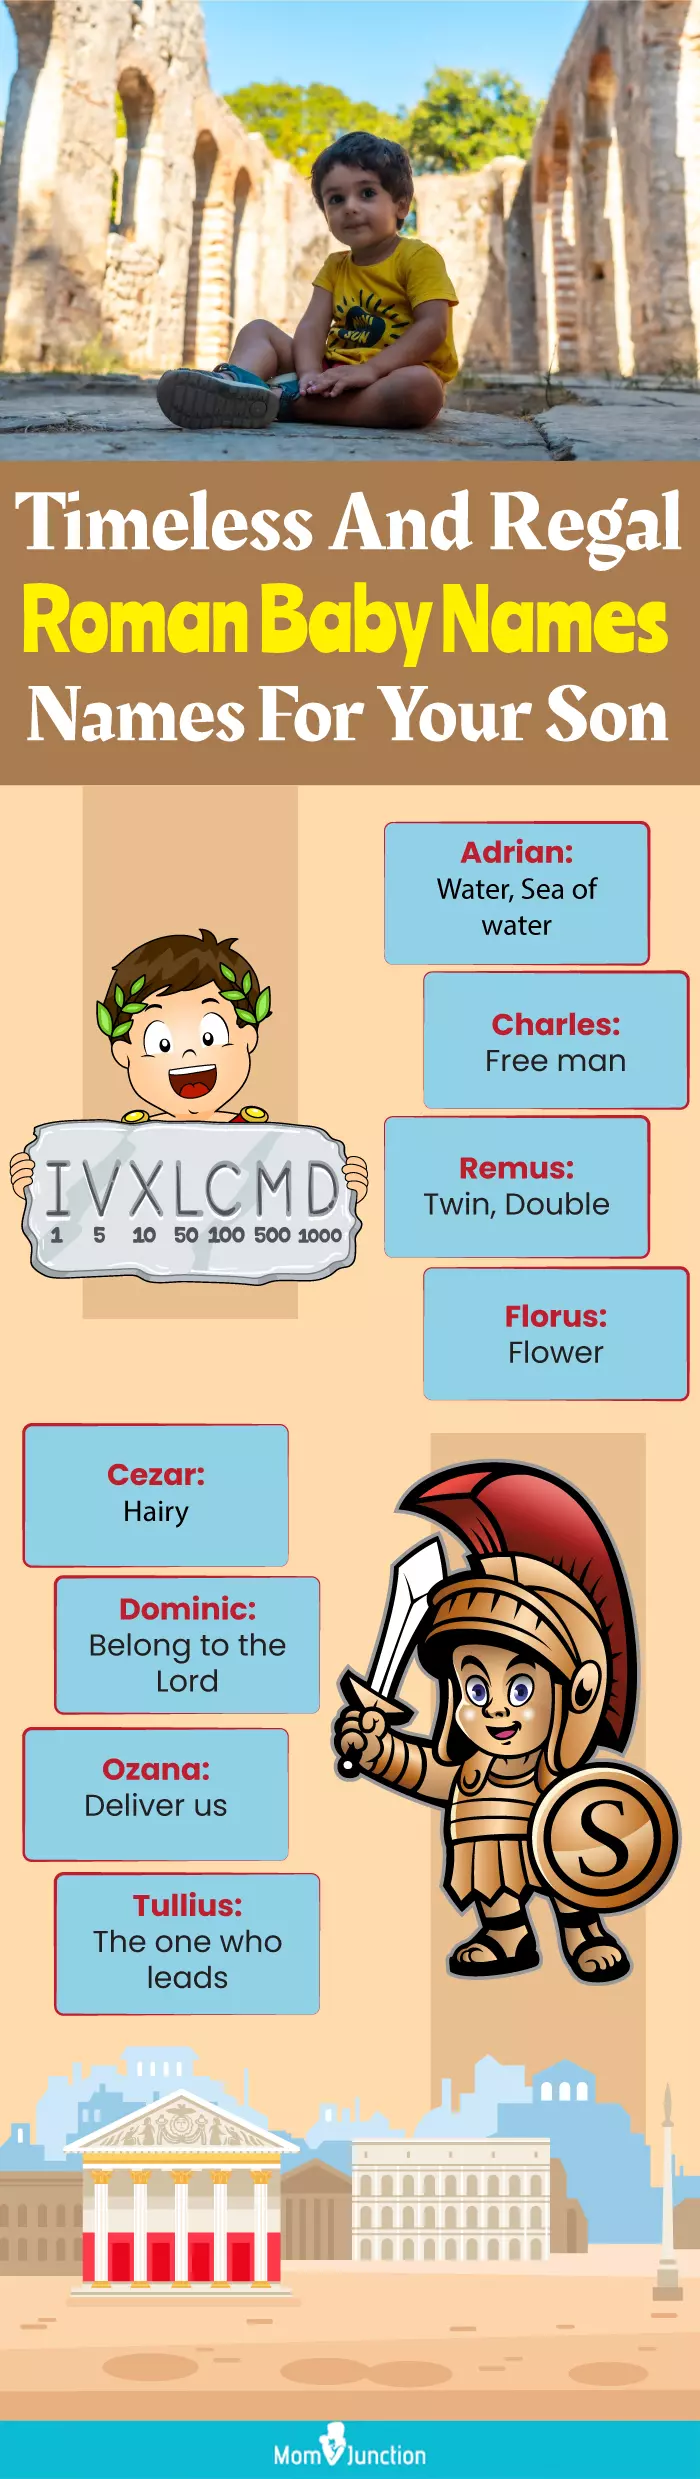 timeless and regal roman baby names for your son (infographic)